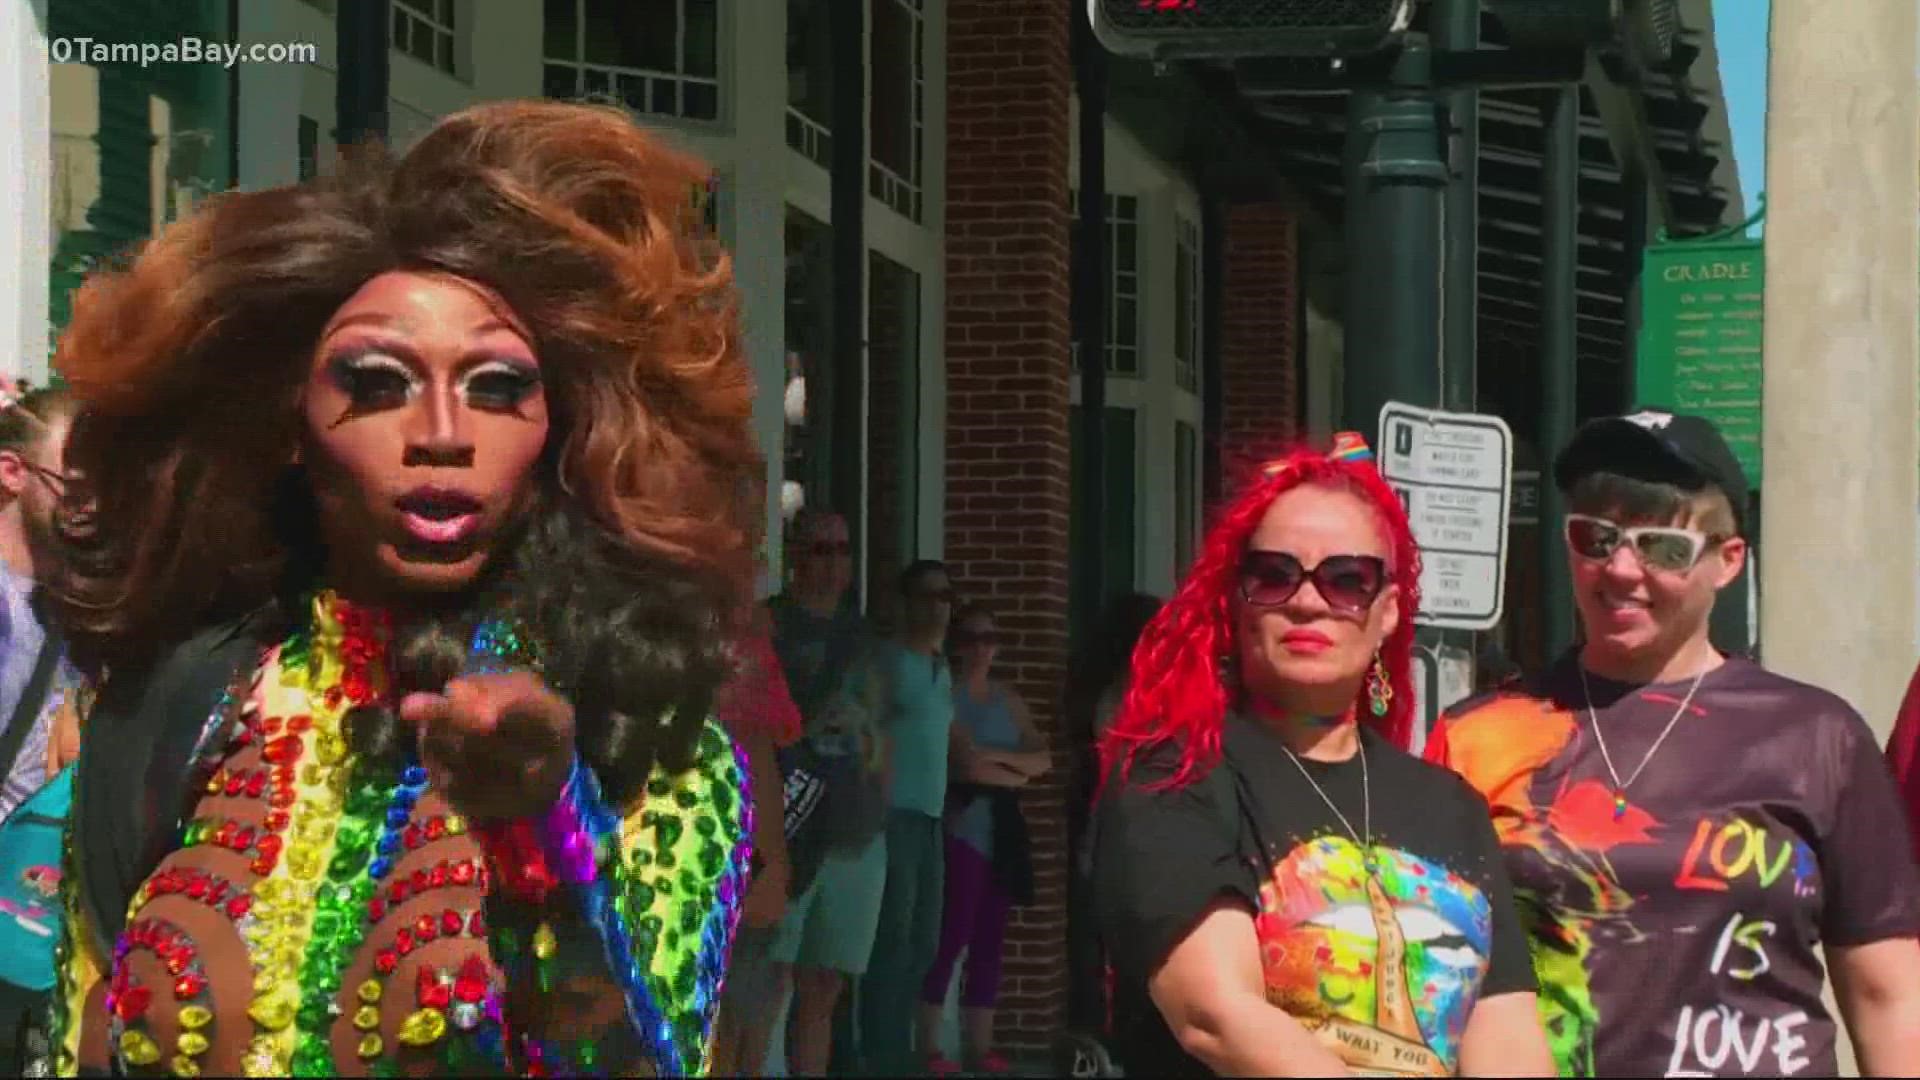 A colorful audience gathers in Tampa's Ybor City for the 7th annual Diversity Parade.